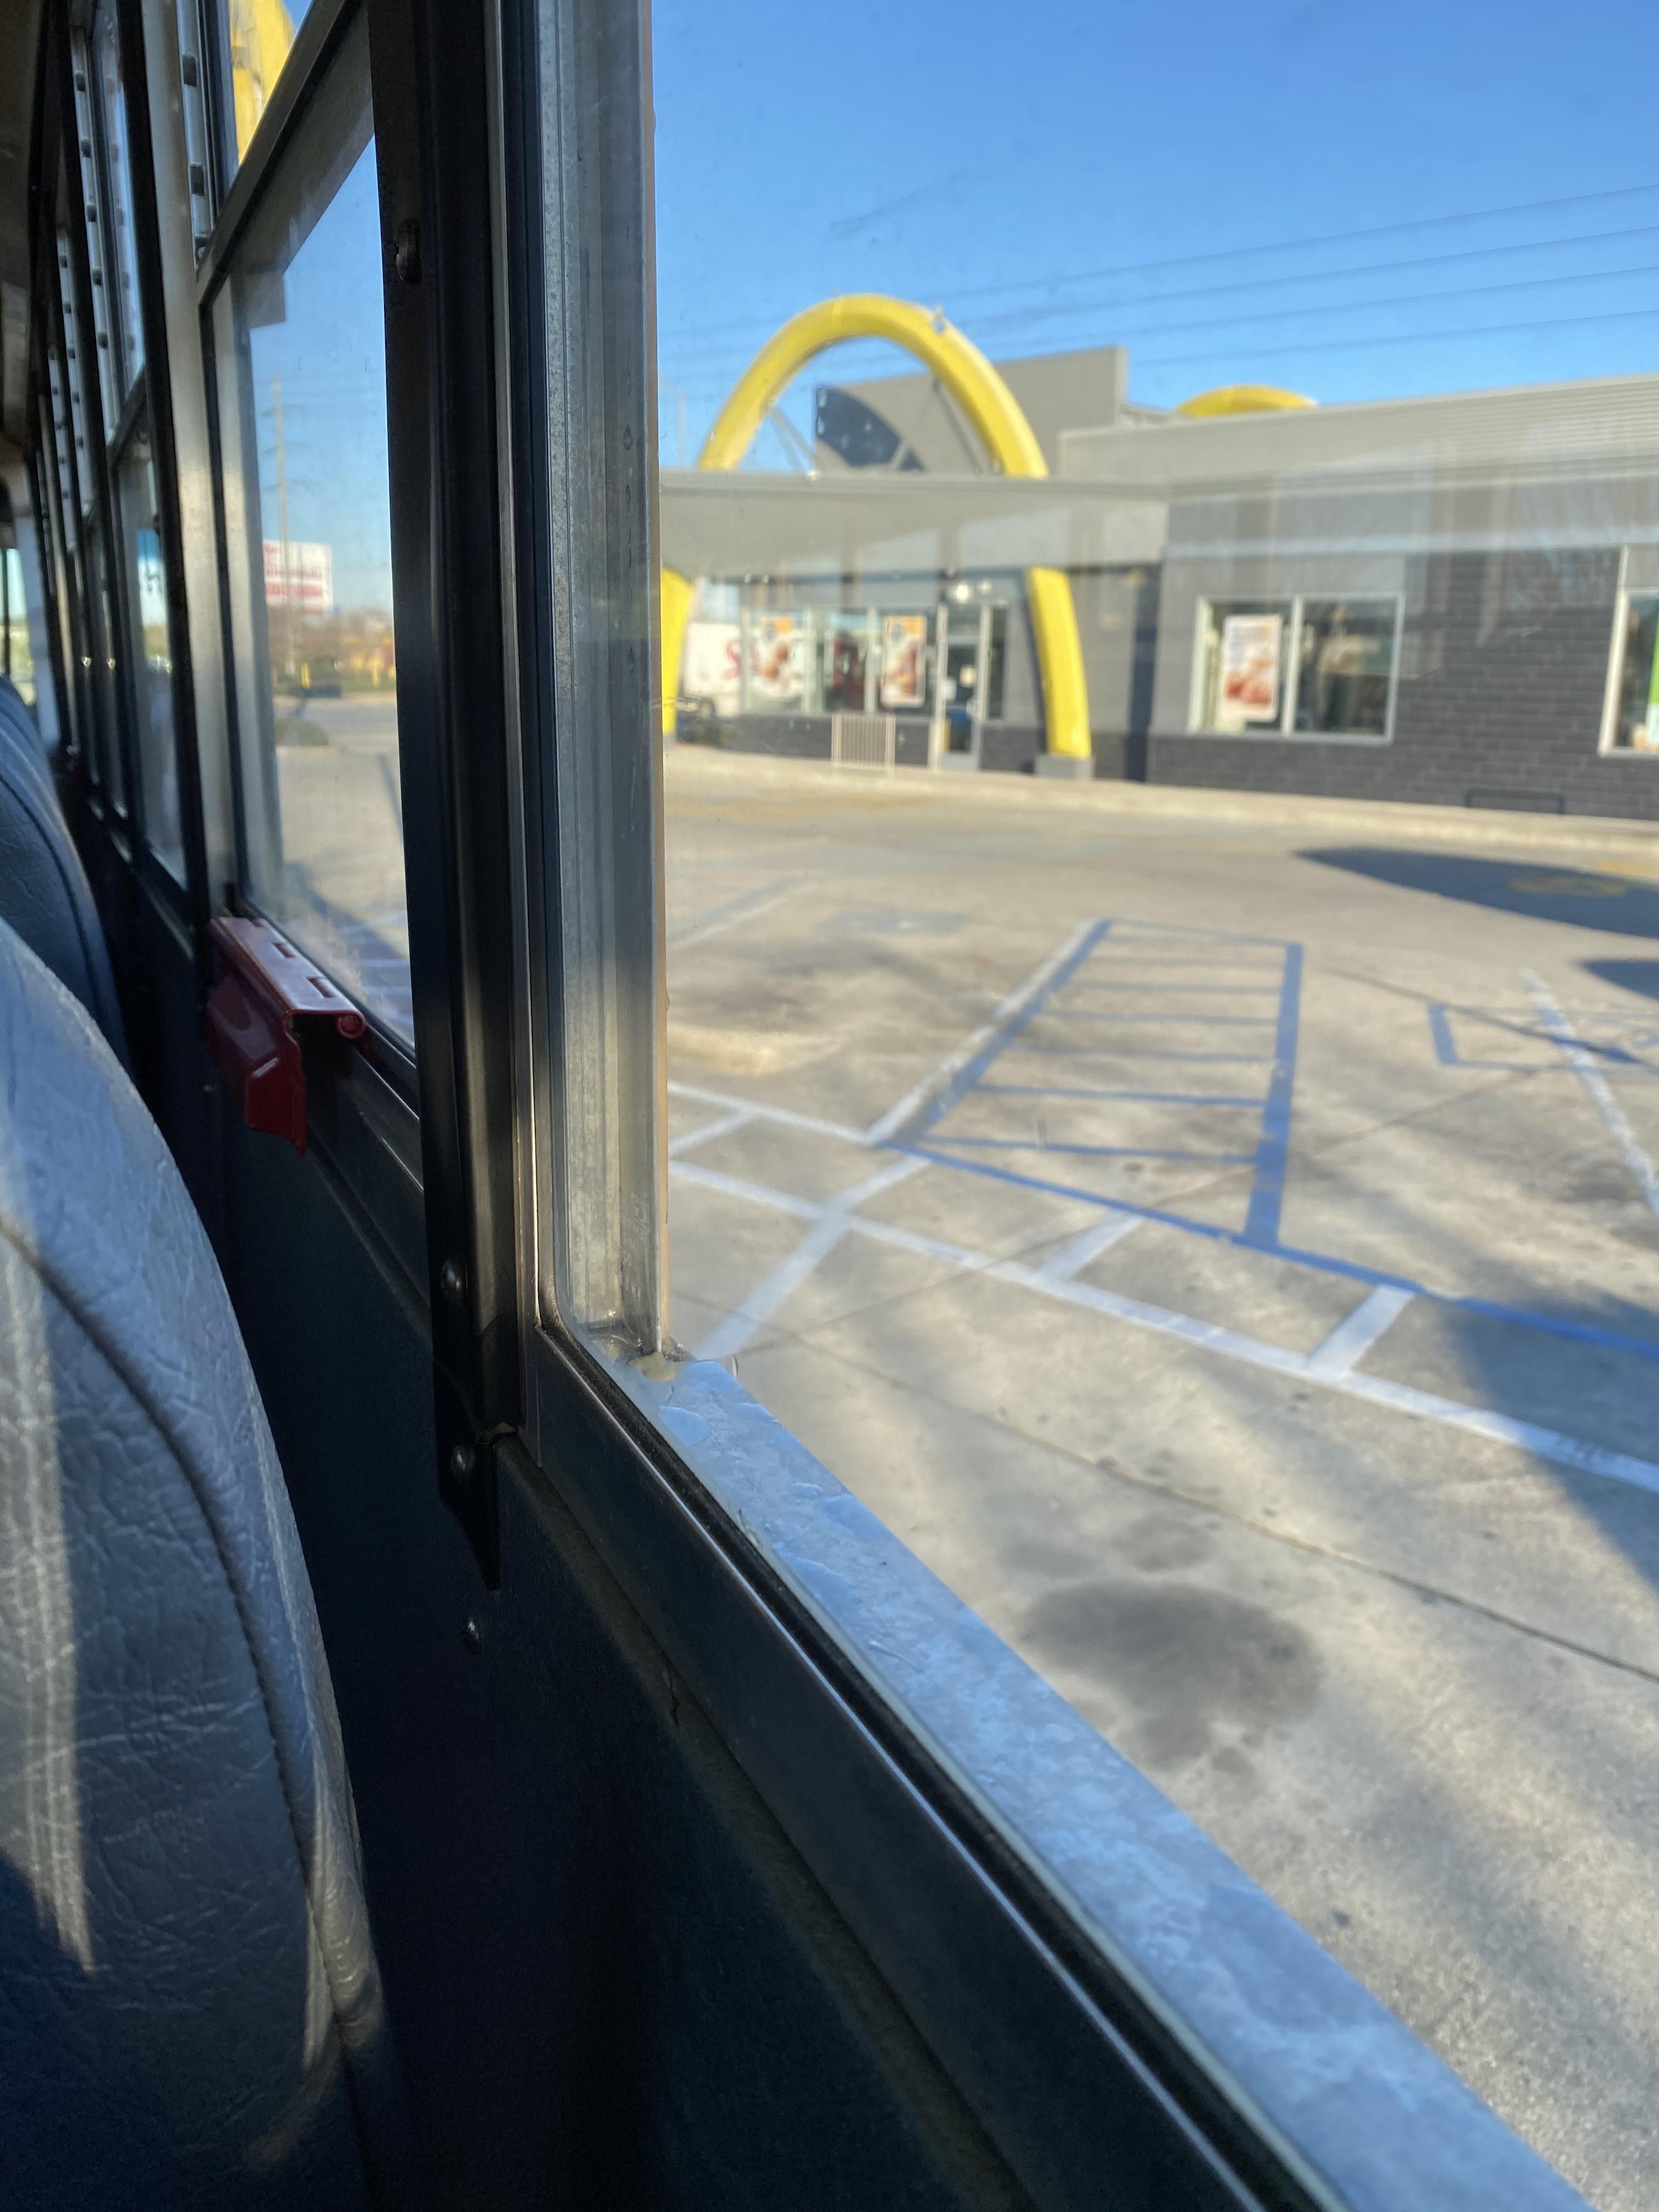 My substitute school bus driver came late to pick us up yesterday morning. To make it up, she took a detour to McDonalds for us to buy breakfast today, making us late again.